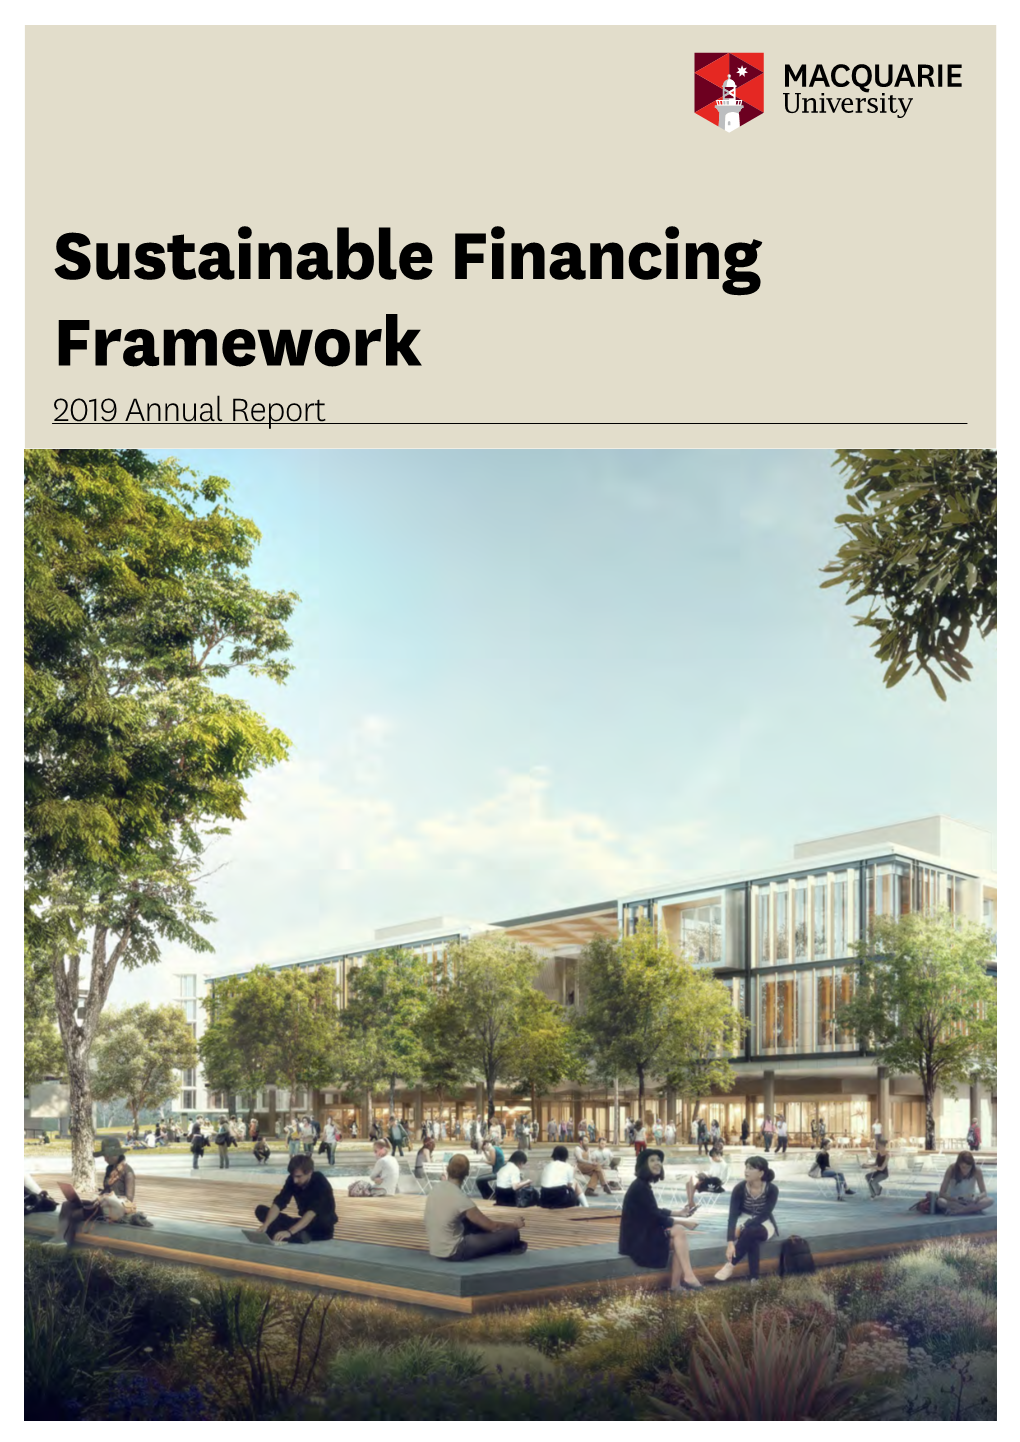 Sustainable Financing Framework 2019 Annual Report Macquarie University Sustainable Financing Framework 2019 Annual Report